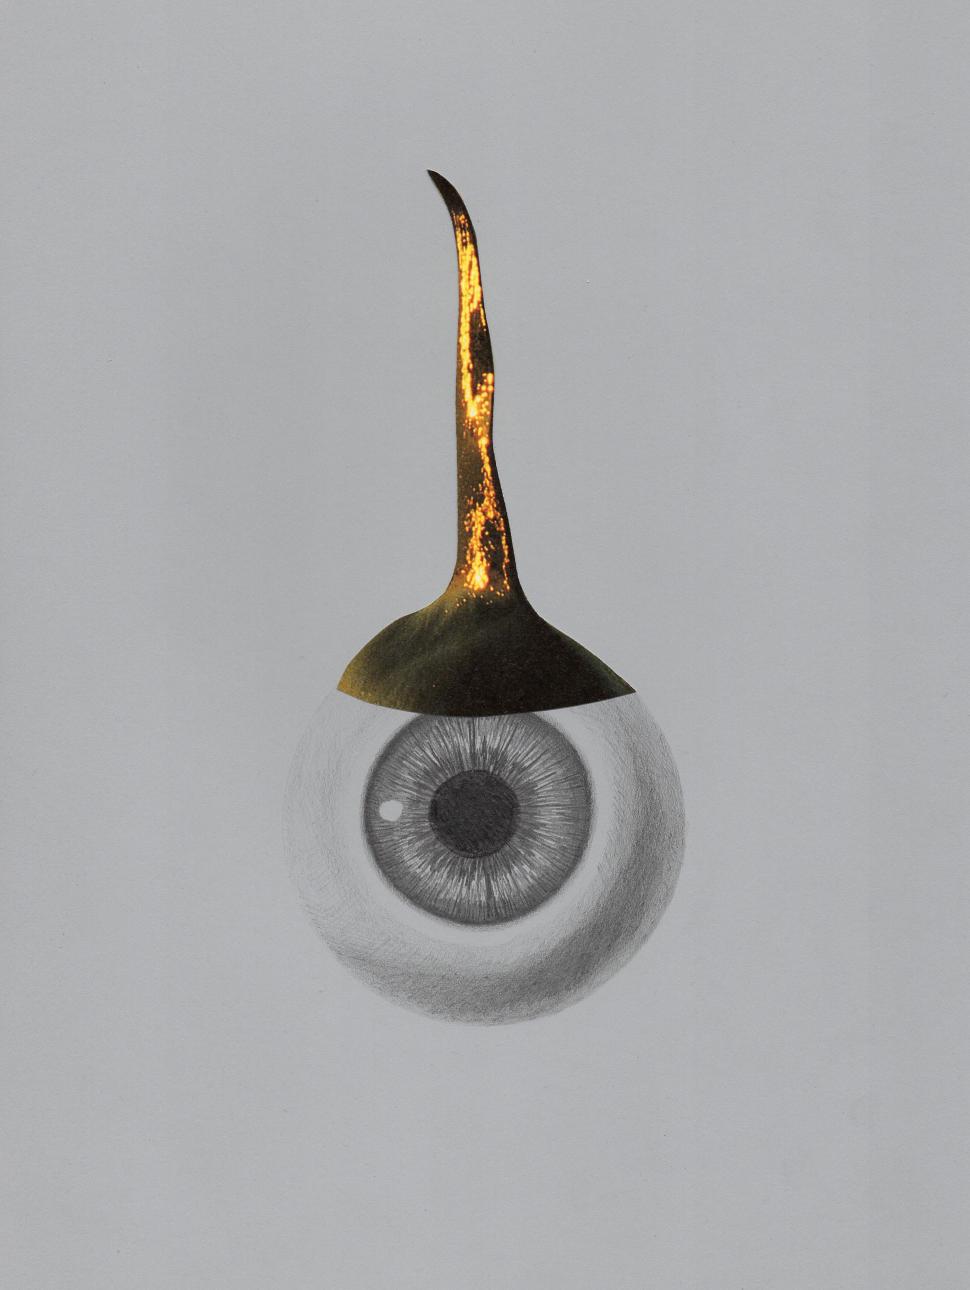 a drawn eyeball with a golden organic strip at the top of the eyeball extending up to a point